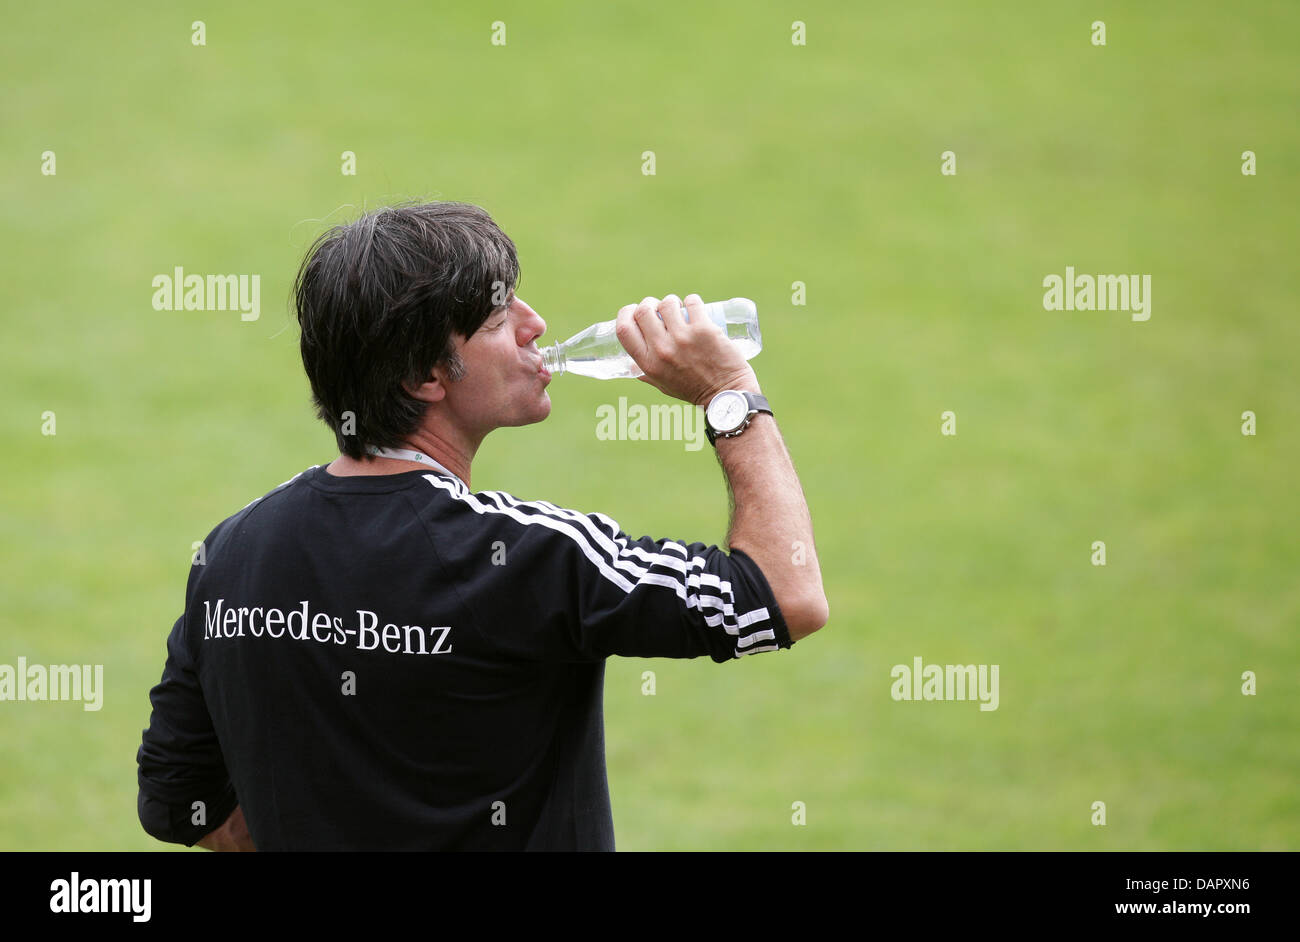 German national soccer team coach Joachim Loew drinks water during a practice session at Paul Janes Stadium in Duesseldorf, Germany, 04 September 2011. On 06 September 2011, Germany will play Poland in a friendly match in Gdansk, Poland. Photo: Rolf Vennenbernd Stock Photo